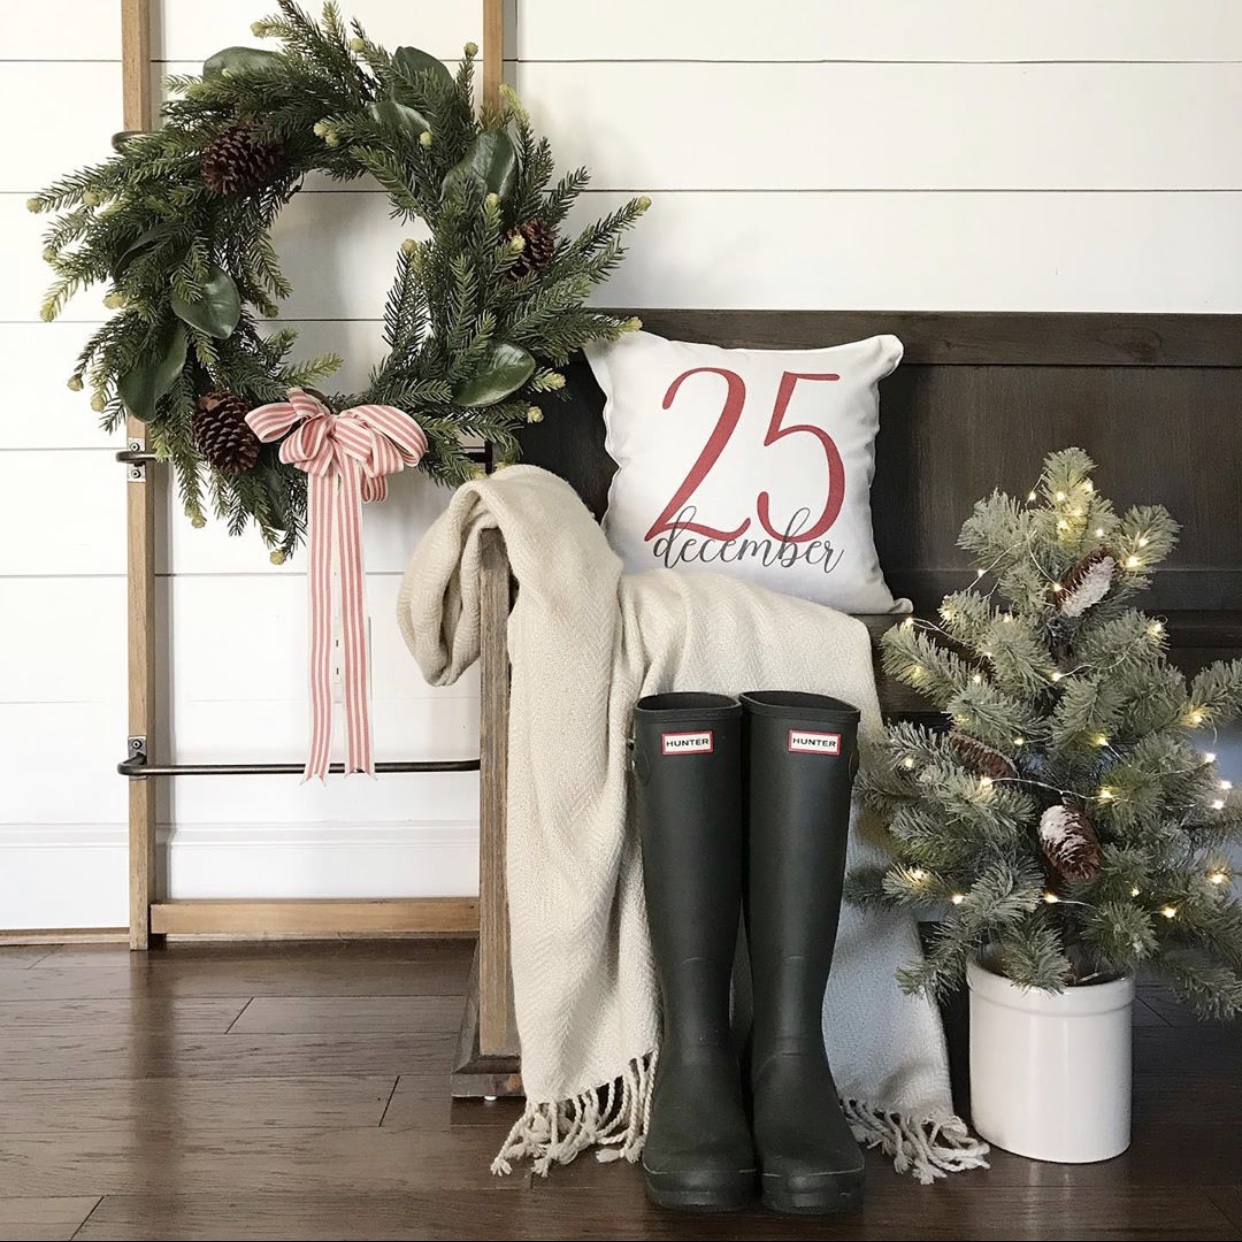 Farmhouse Christmas decor vignette with a wreath, a small Christmas tree, a pillow and blanket.